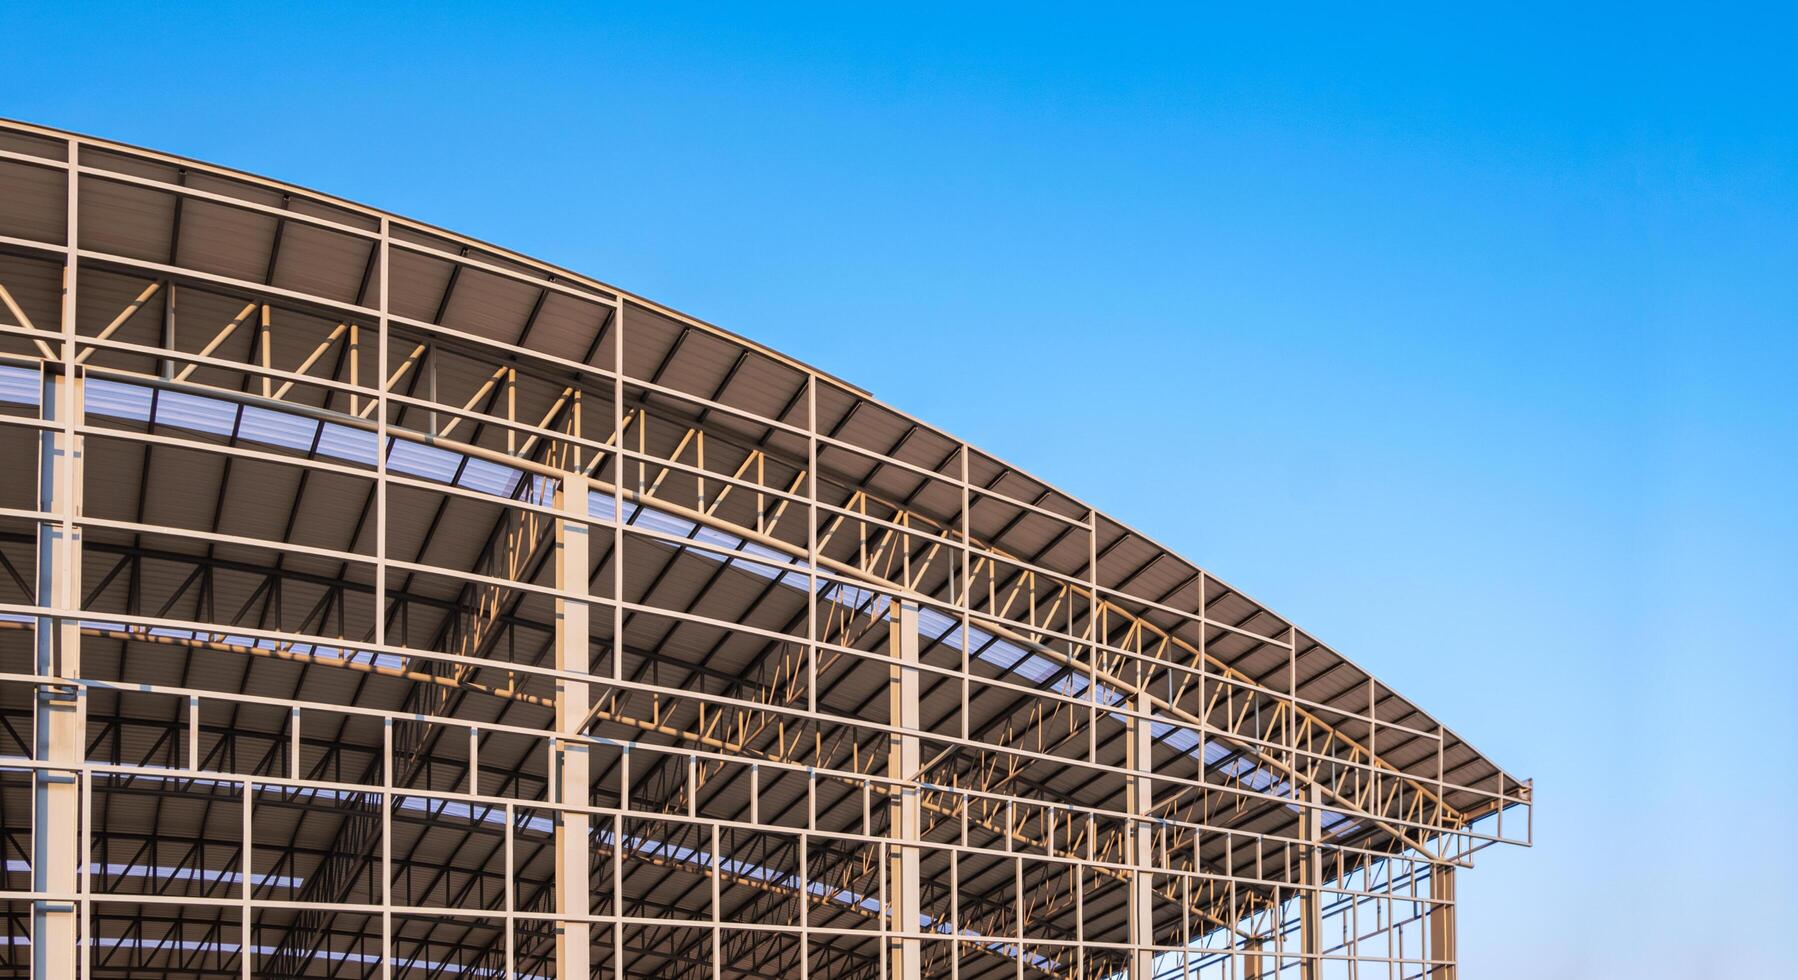 Part of large metal industrial factory building structure with corrugated steel curve roof and skylights in construction site against blue sky background, low angle view with copy space photo